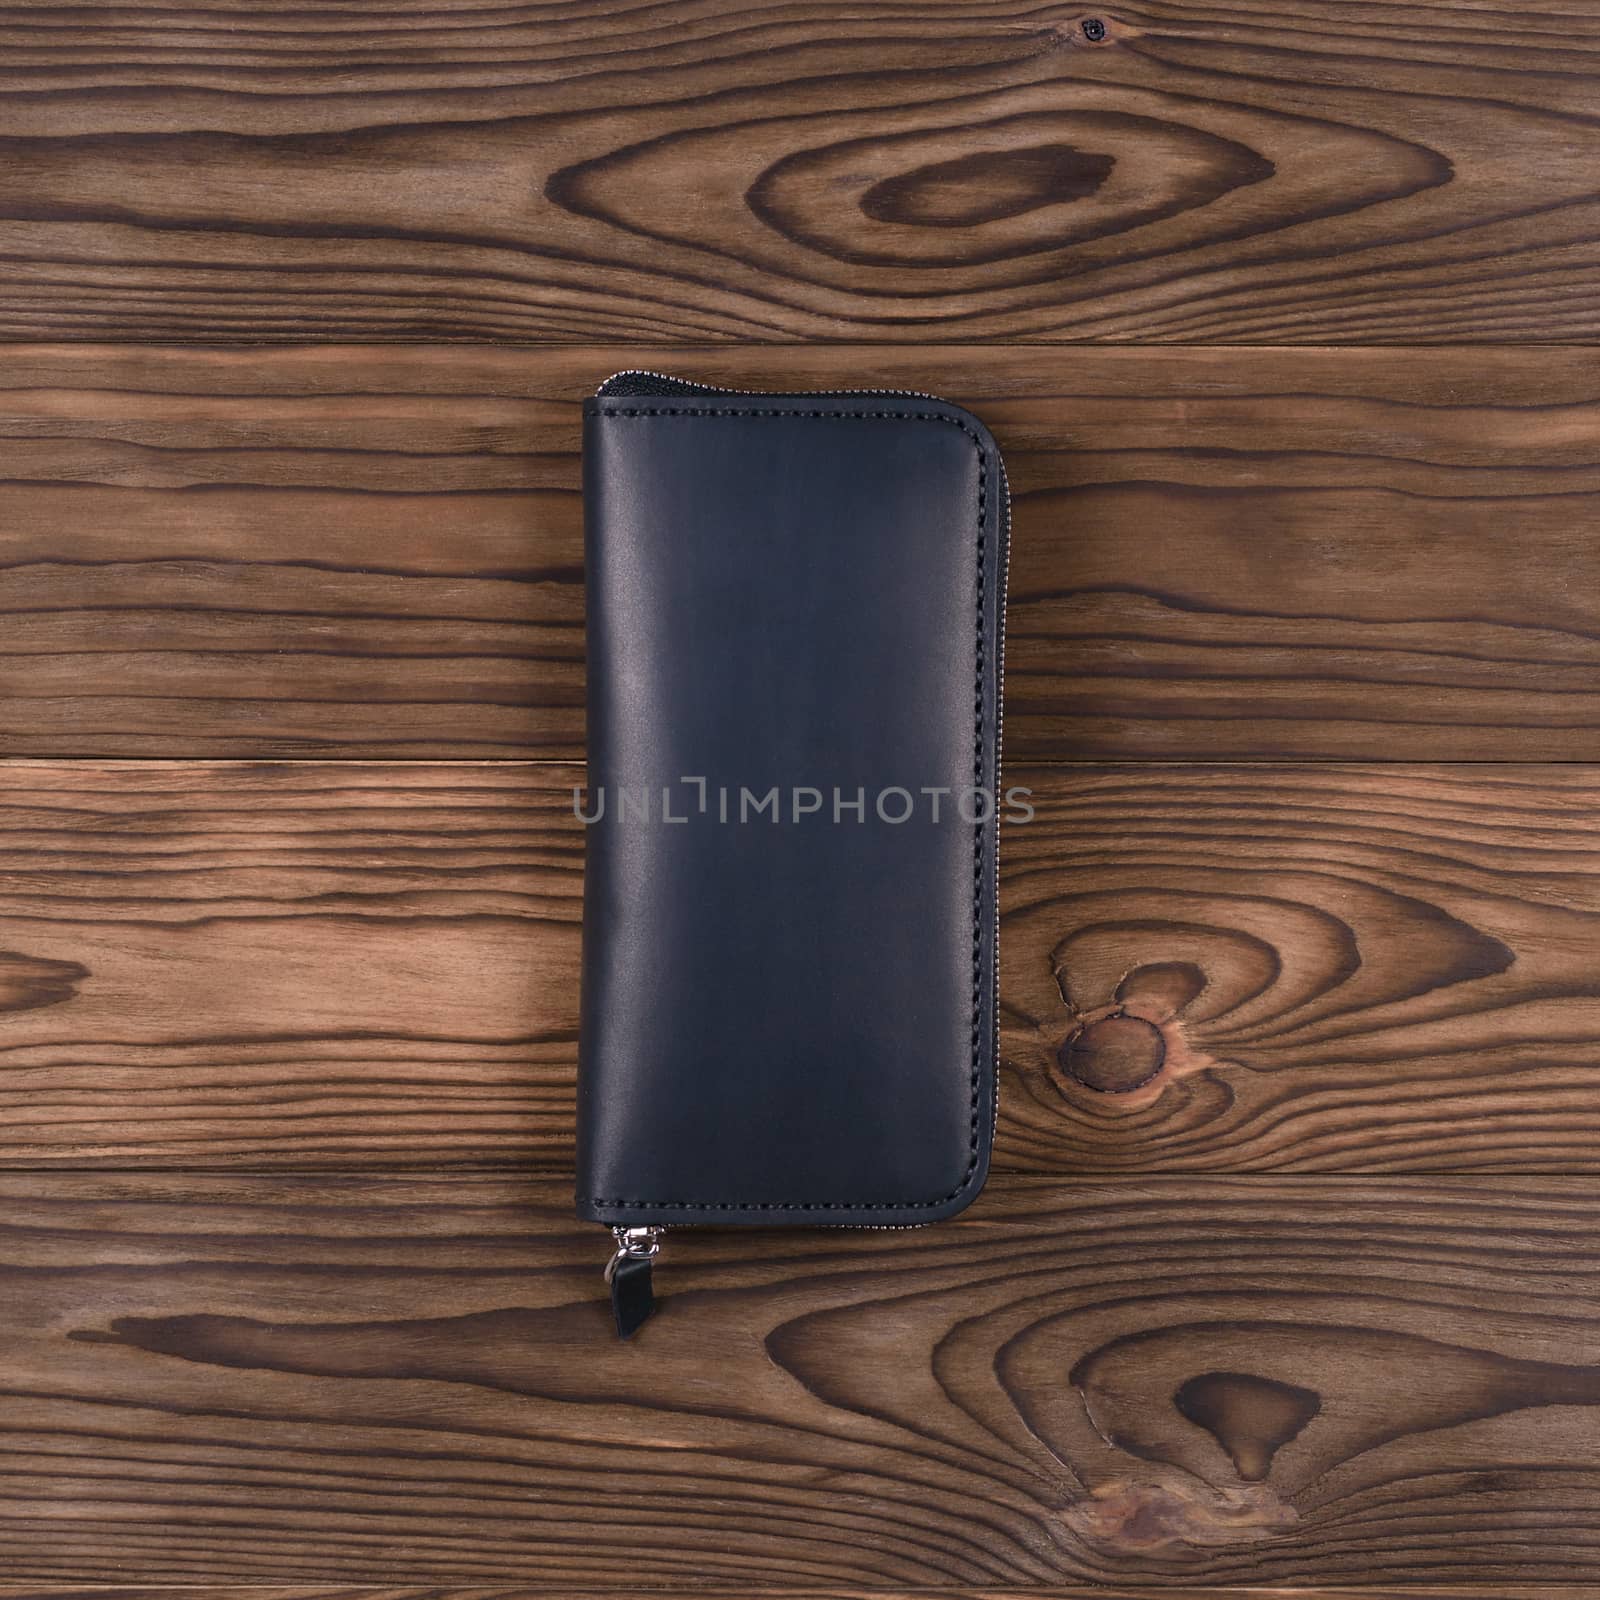 Mattle black color handmade leather porte-monnaie on wooden textured background.  Up to down view. Stock photo of luxury accessories. by alexsdriver